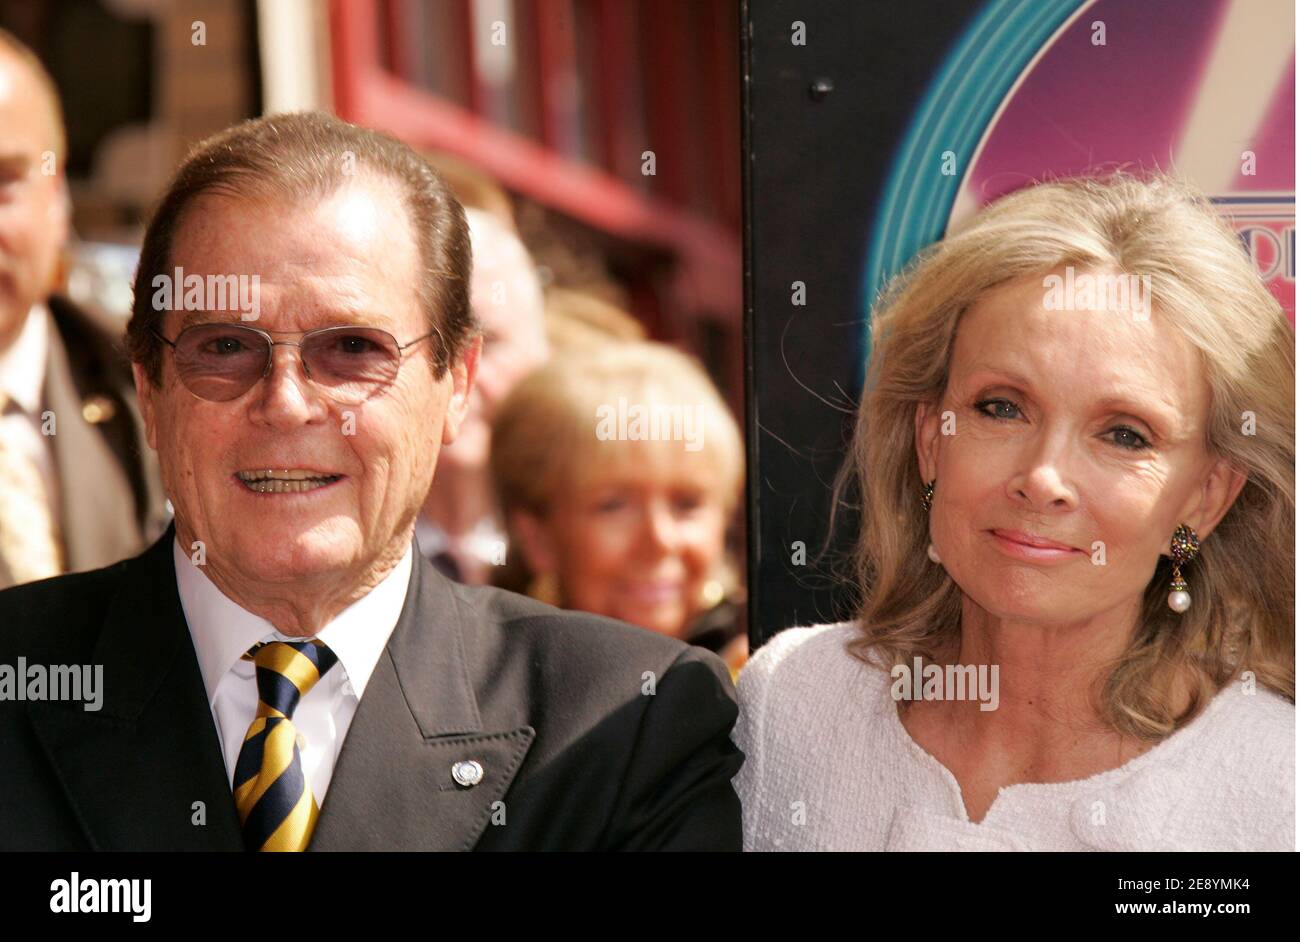 Sir Roger Moore poses with his wife Christina Tholstrup as he is honored with the 2,350th Star on The Hollywood Walk of Fame in Hollywood, CA, USA on October 11, 2007. Photo by Walker/ABACAPRESS.COM Stock Photo